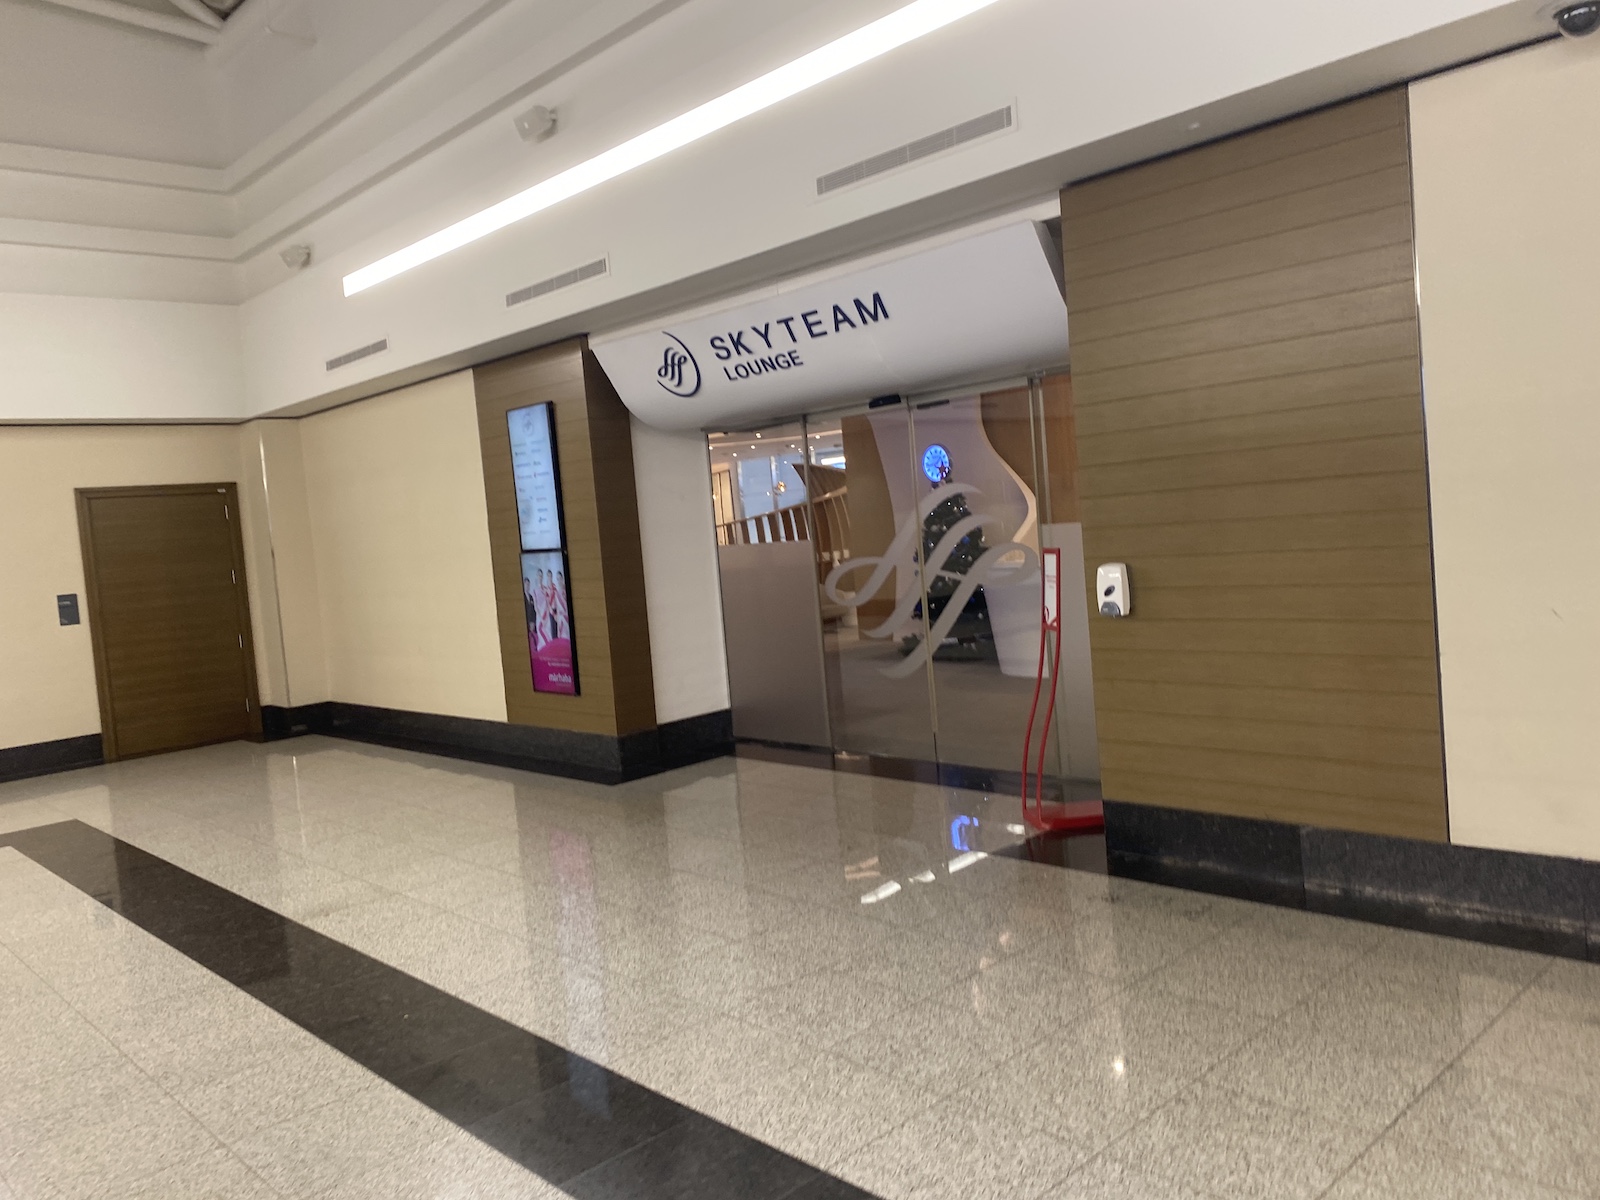 Entrance to SkyTeam lounge at DXB airport